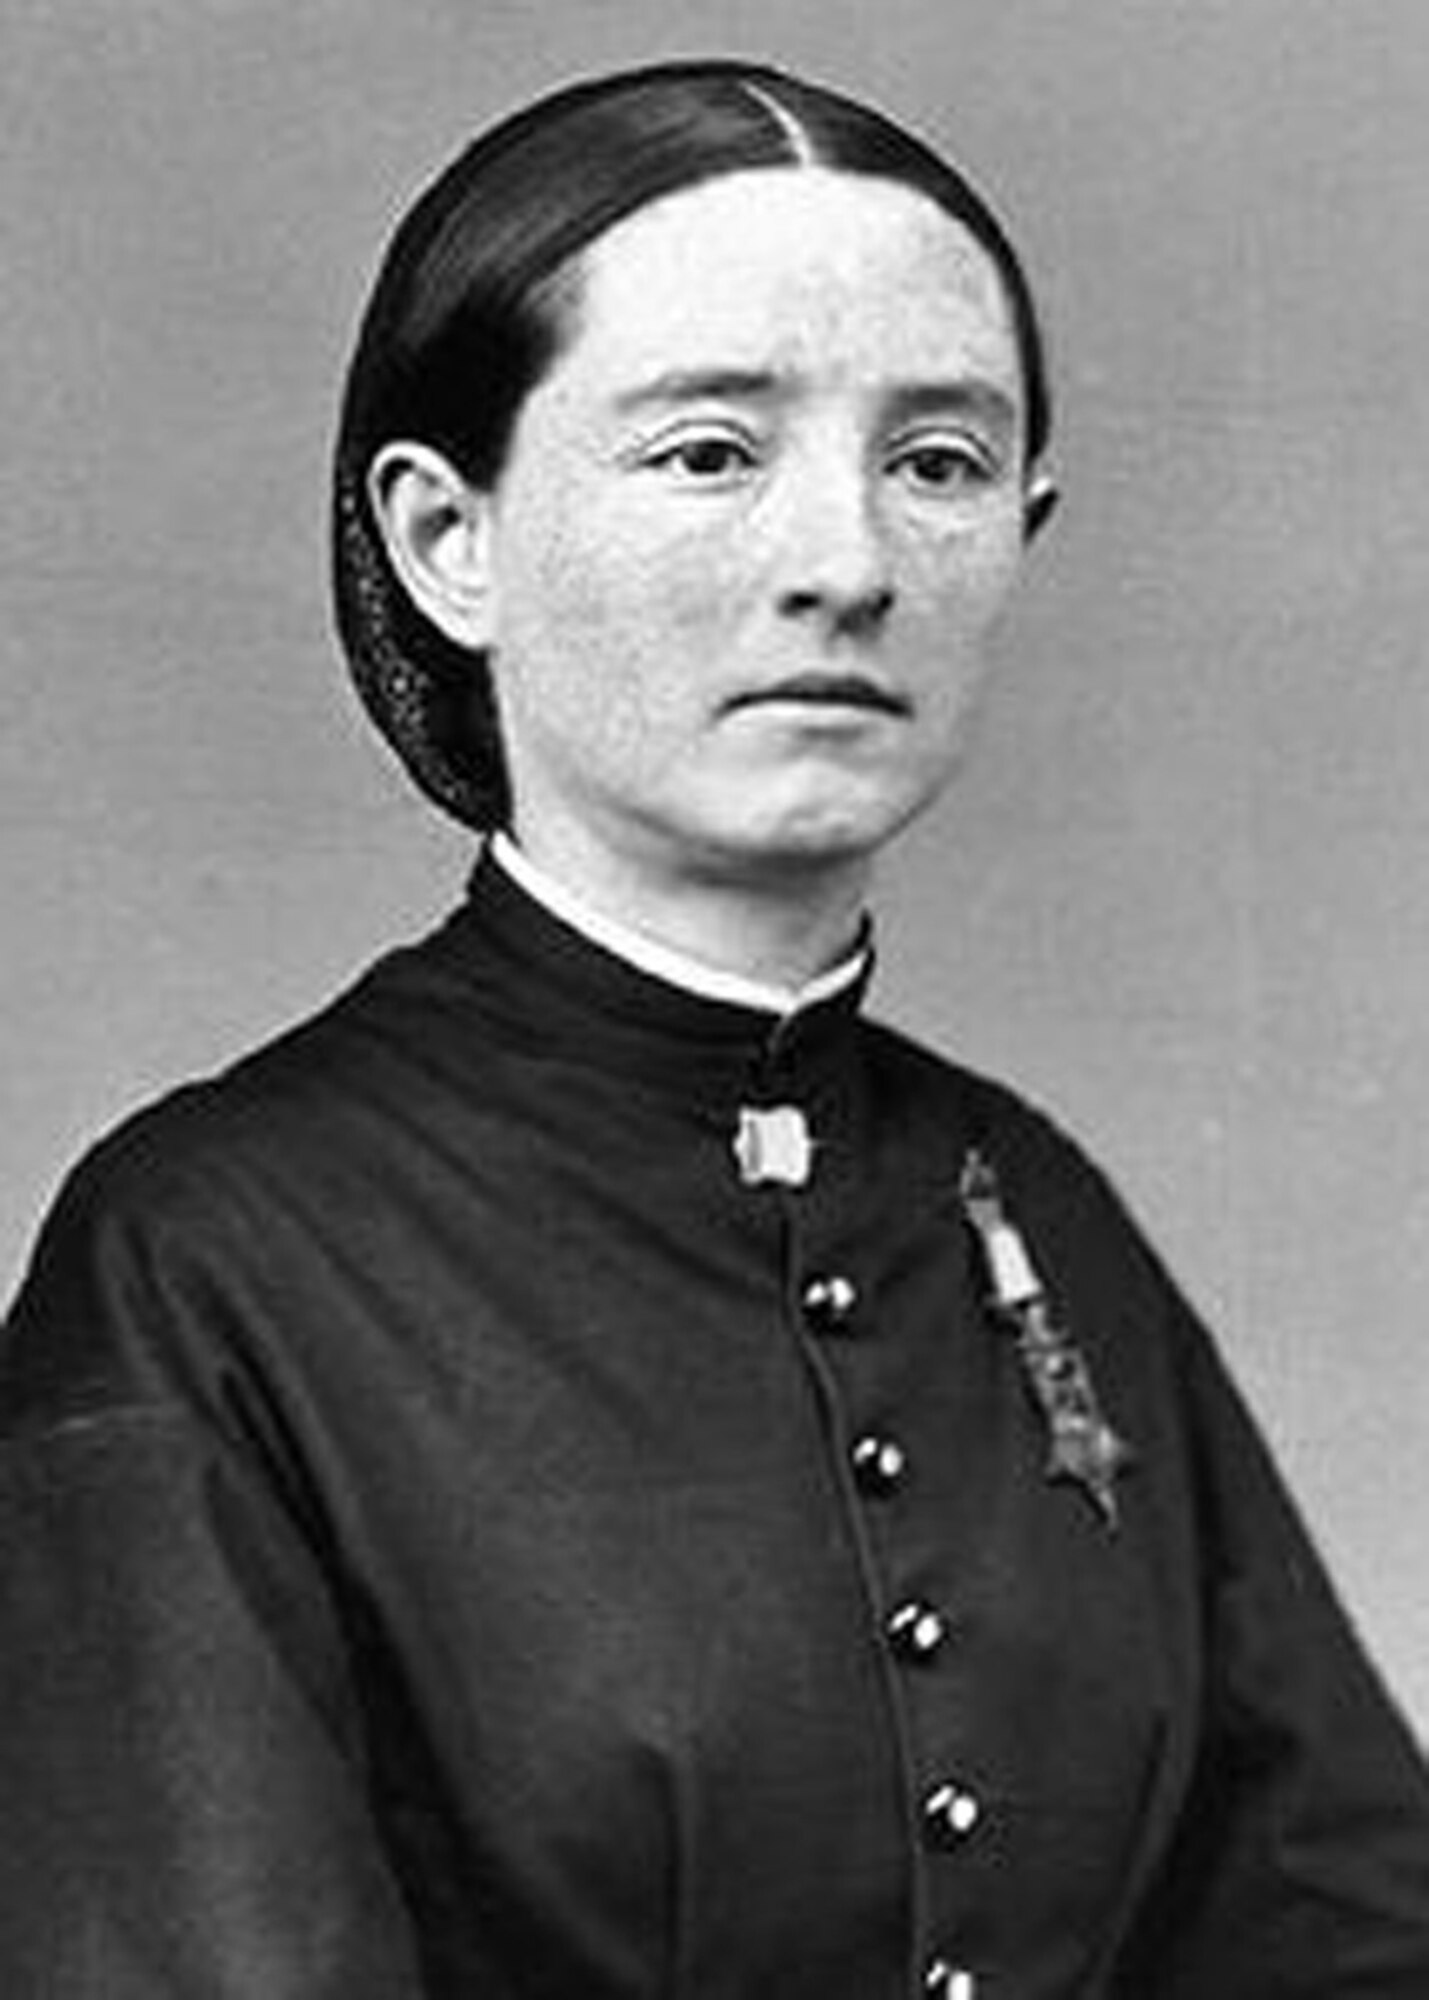 Mary Edwards Walker is the first and only woman in history to earn the Congressional Medal of Honor. When the Civil War broke out, she went to Washington and tried to join the Union Army. She was denied a commission as a medical officer but volunteered anyway, serving unpaid as an acting assistant surgeon, the first female surgeon in the U.S. Army. (photo courtesy of U.S. Army)